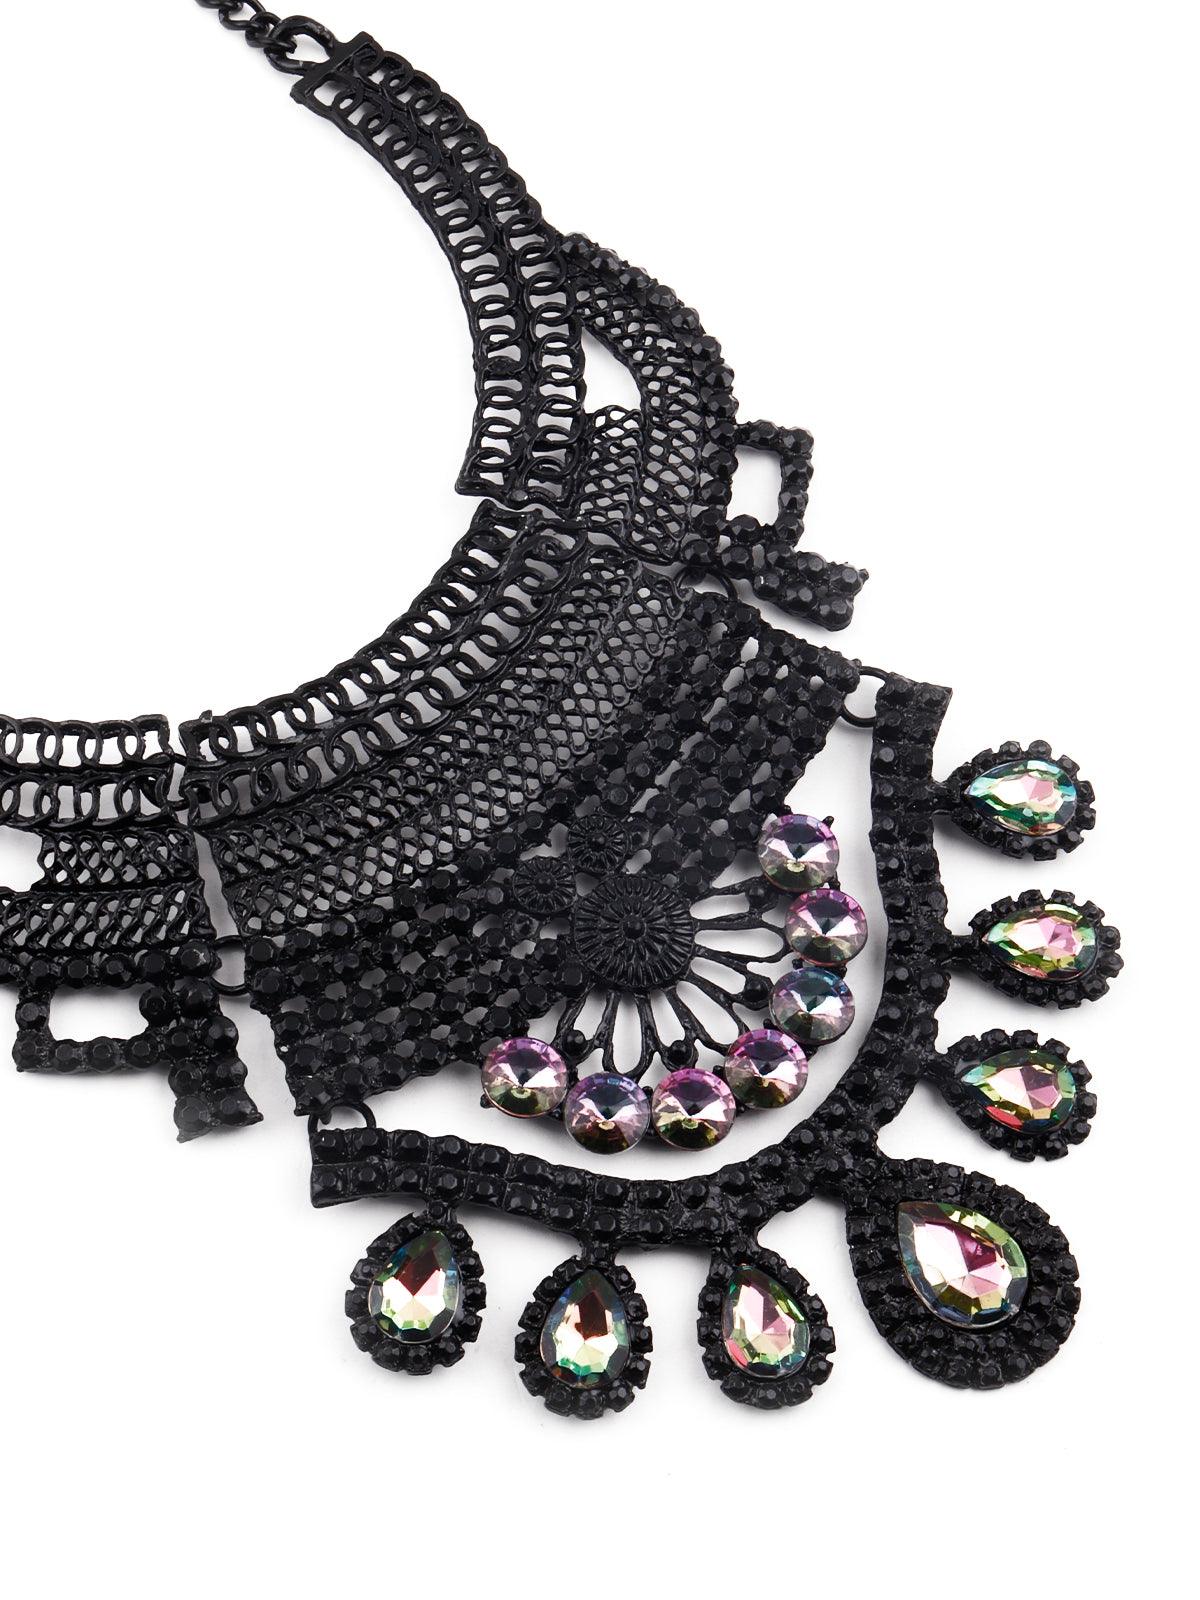 Gorgeous black silhouette necklace for women - Odette